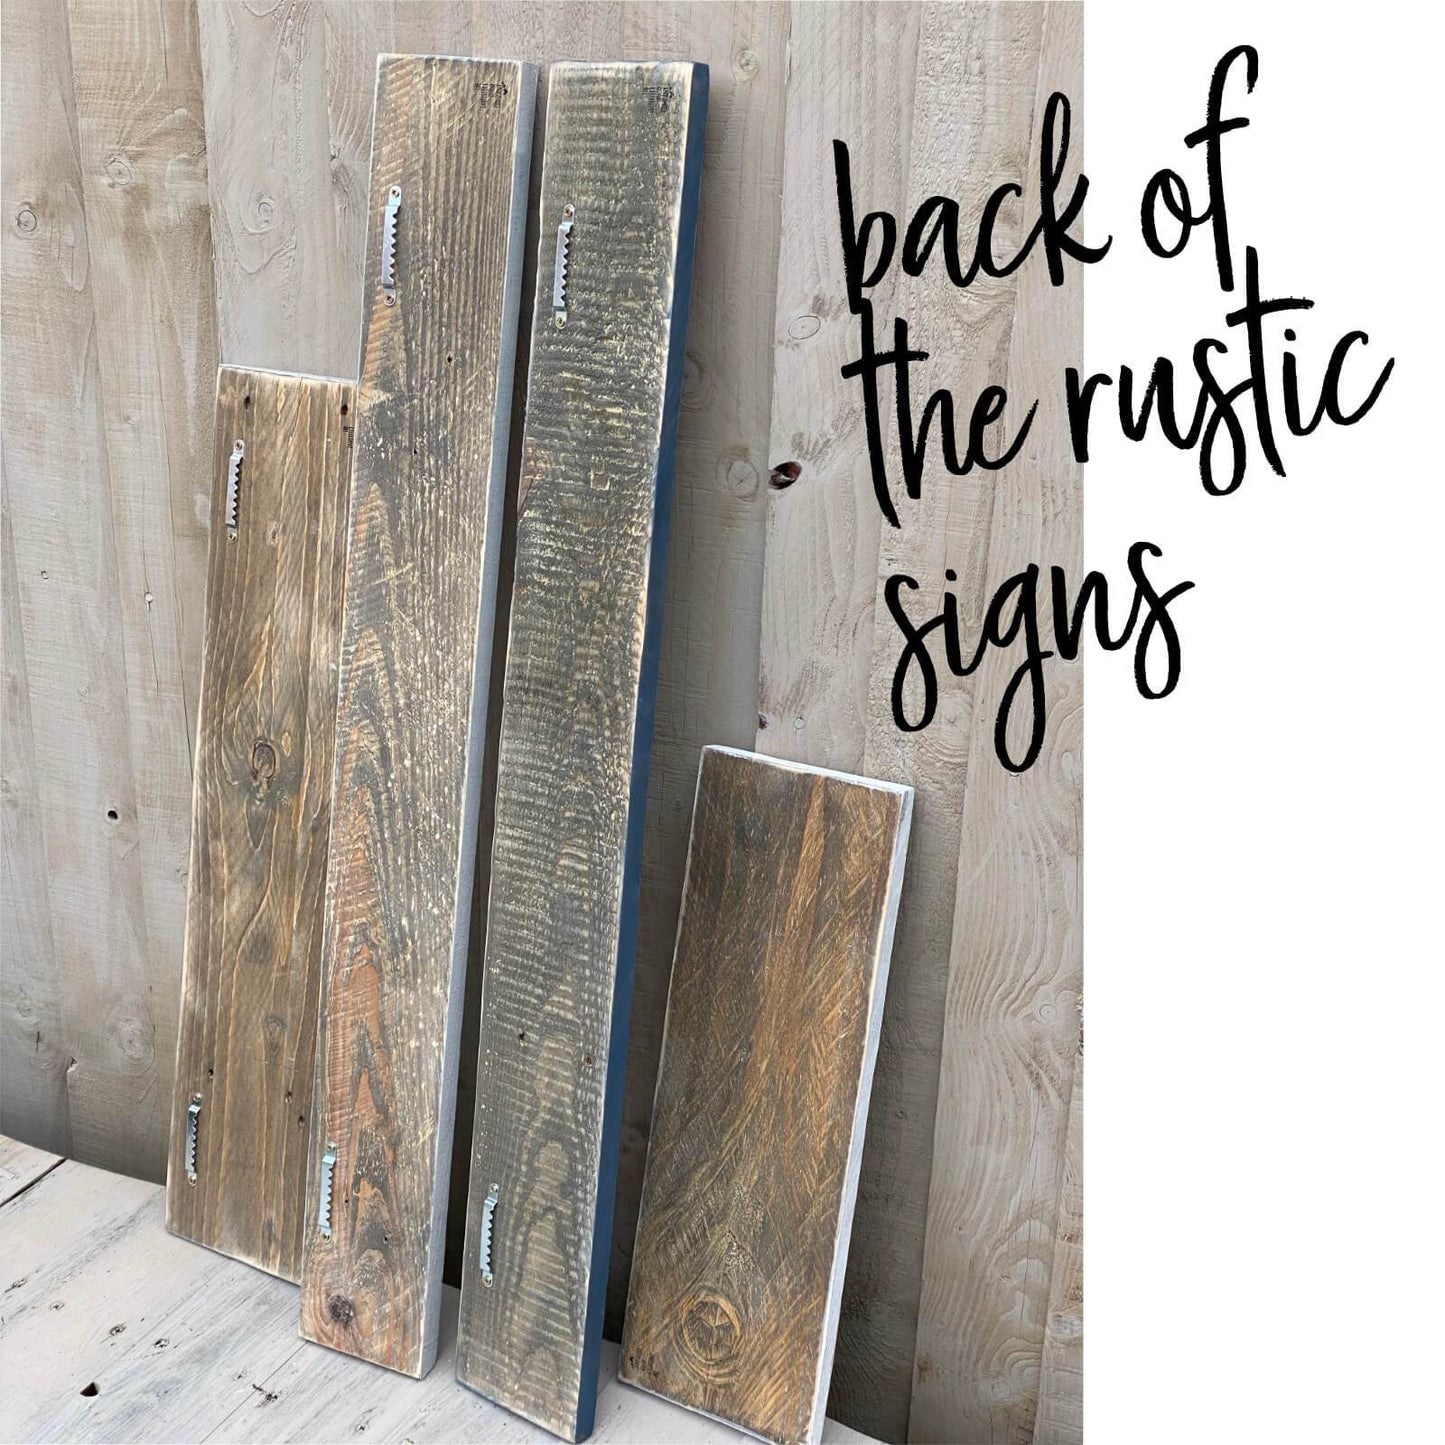 I often sit in my garden | Reclaimed Planked Wood Sign - The Imperfect Wood Company - Planked Wood Sign